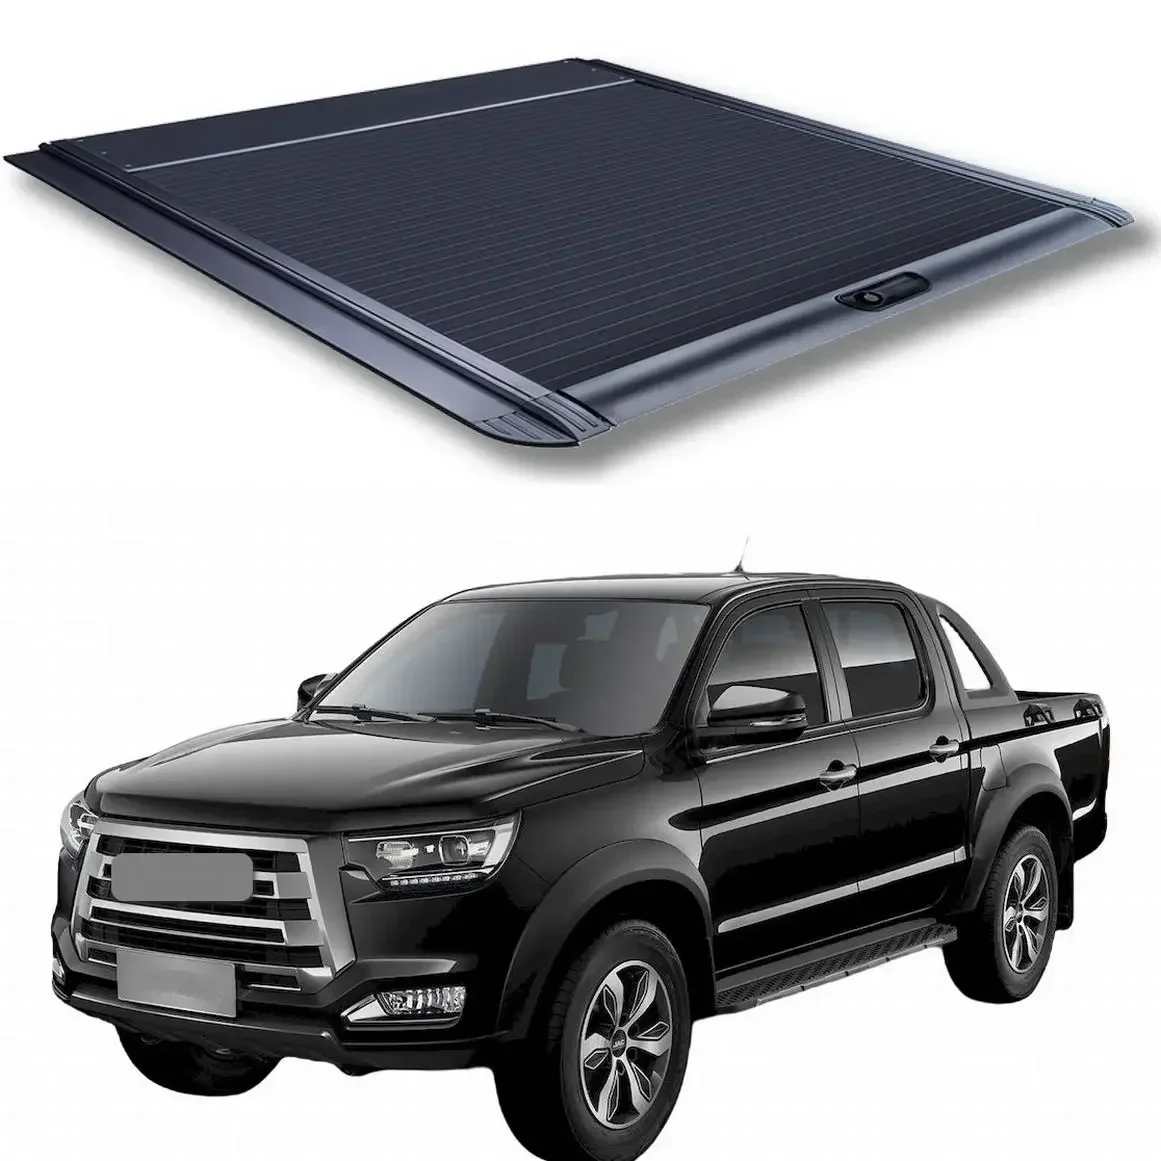 

Ousaier Pickup truck car accessories retractable manual Roller Lid truck bed covers for JAC Shuailing T6/T8 standard bed Frison